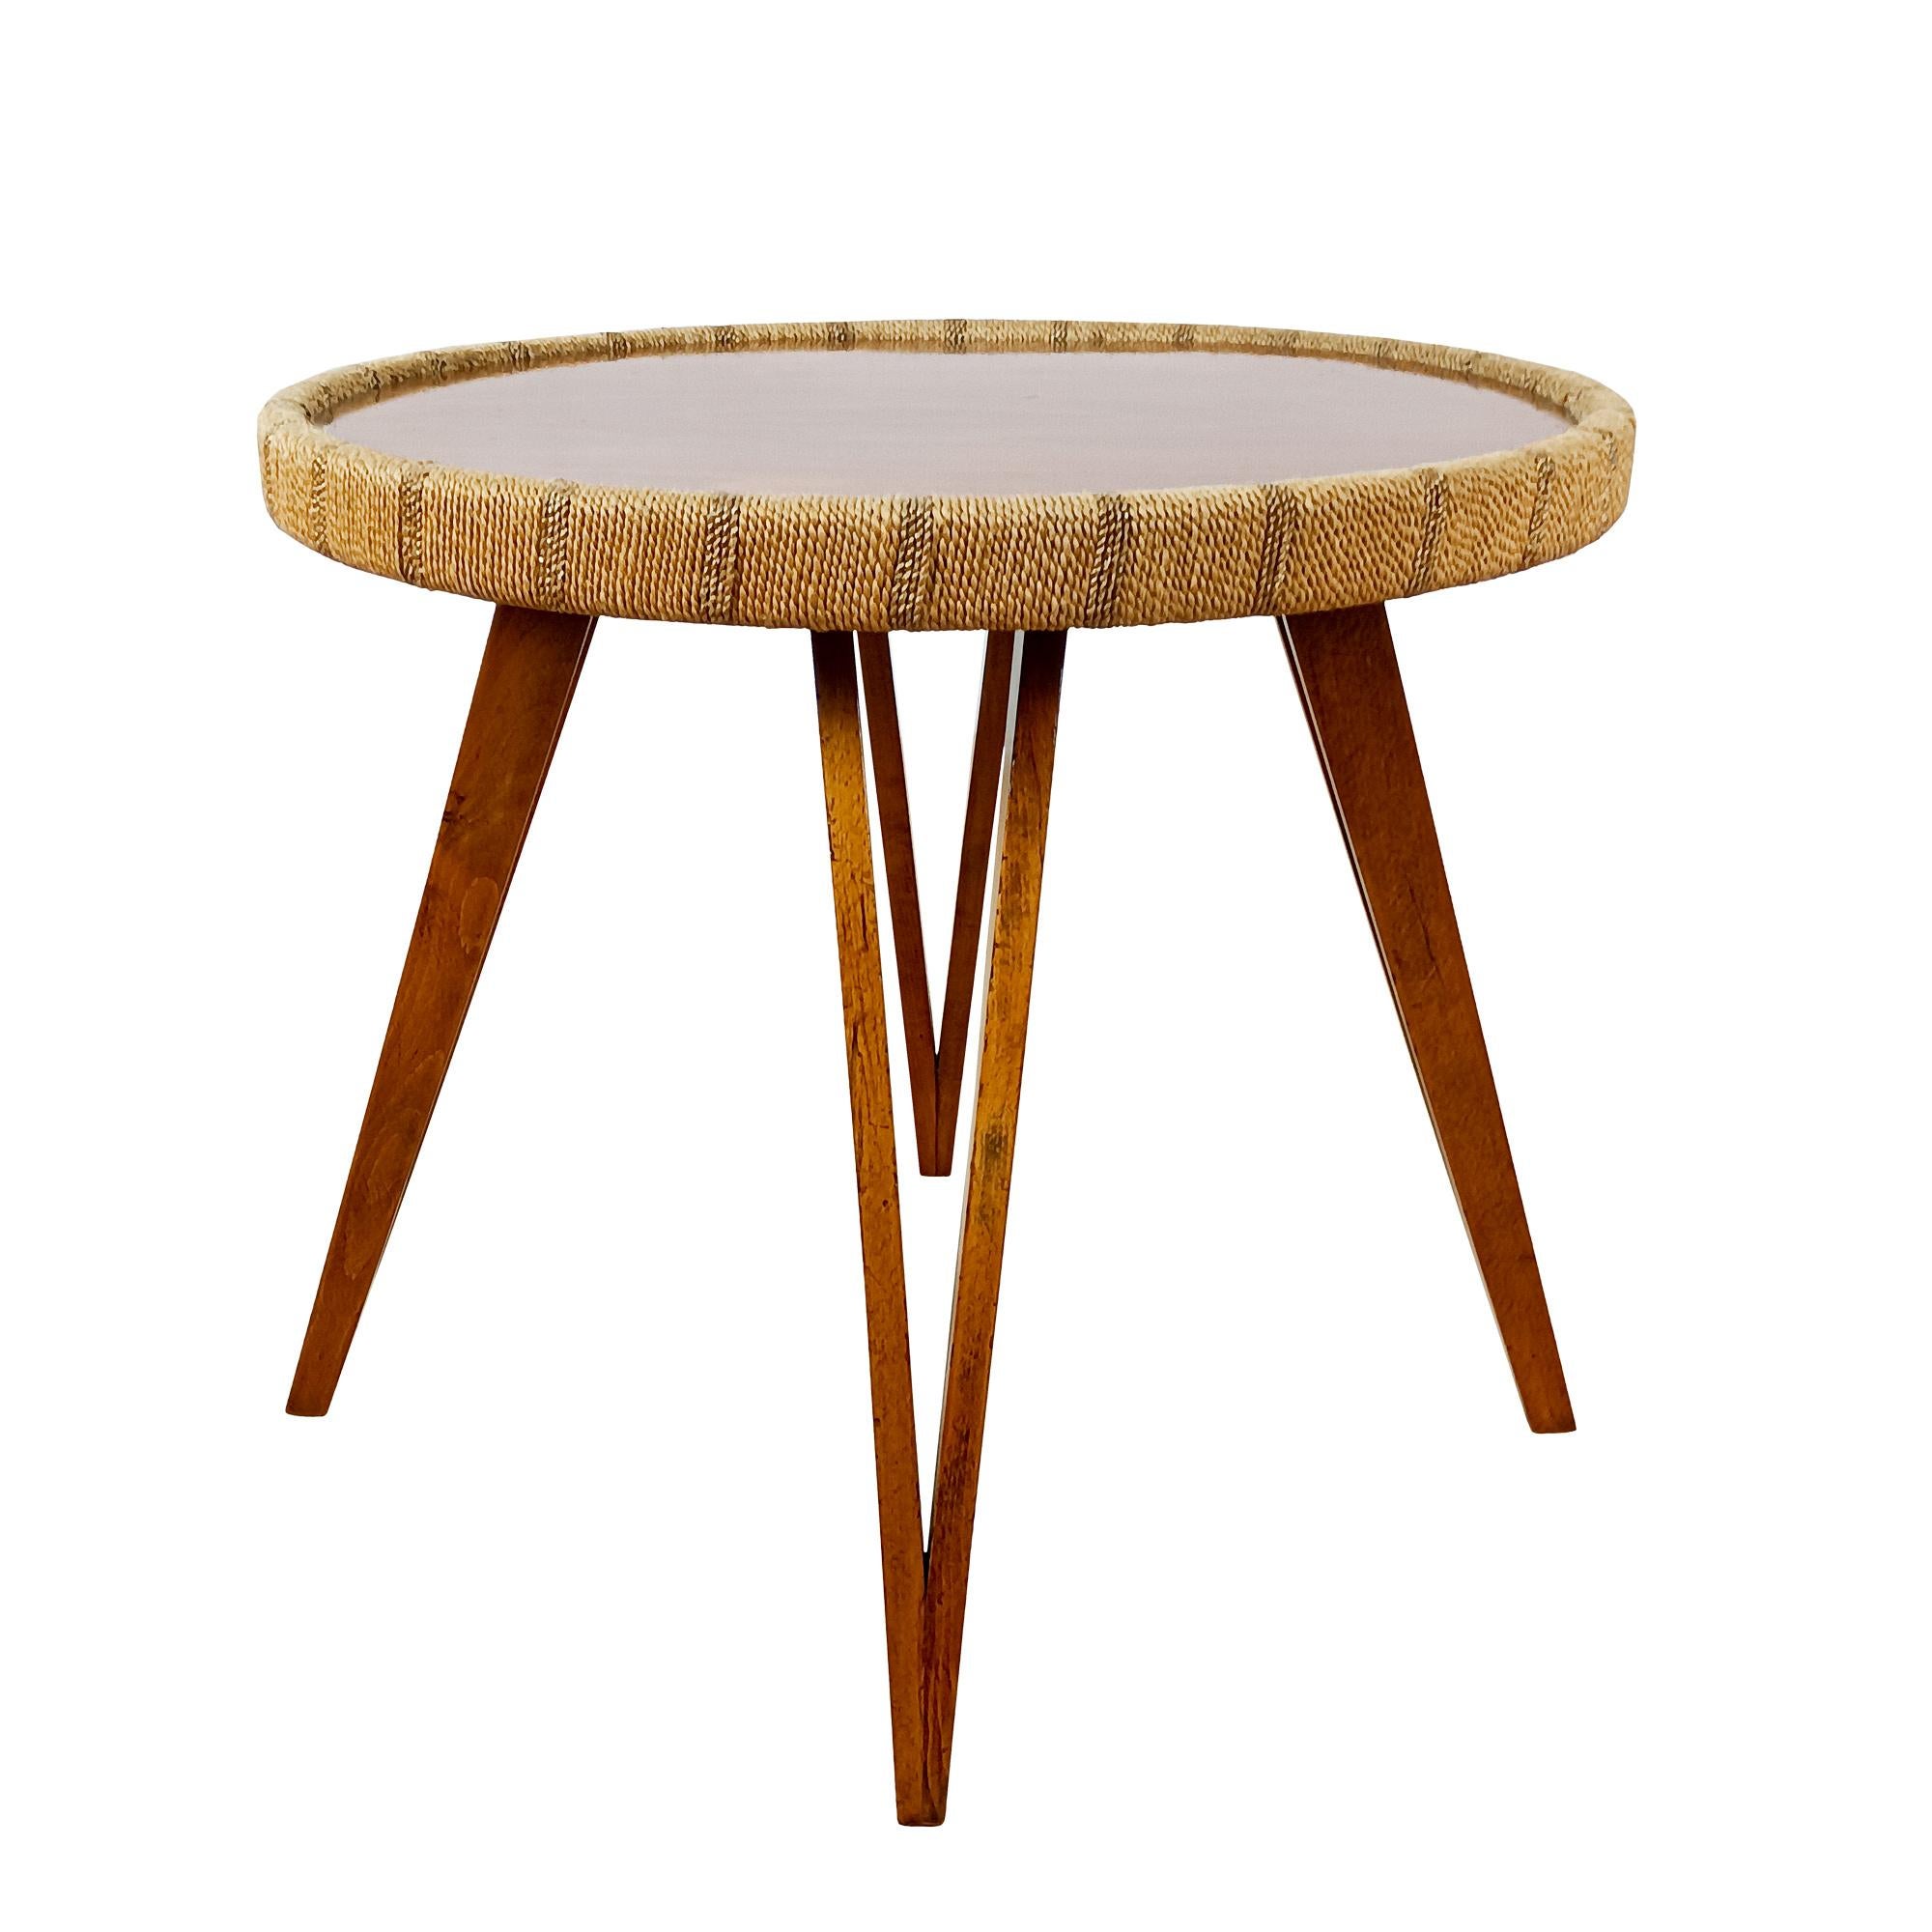 Italian Mid-Century Modern Side Table by Augusto Romano – Italy 1950 For Sale